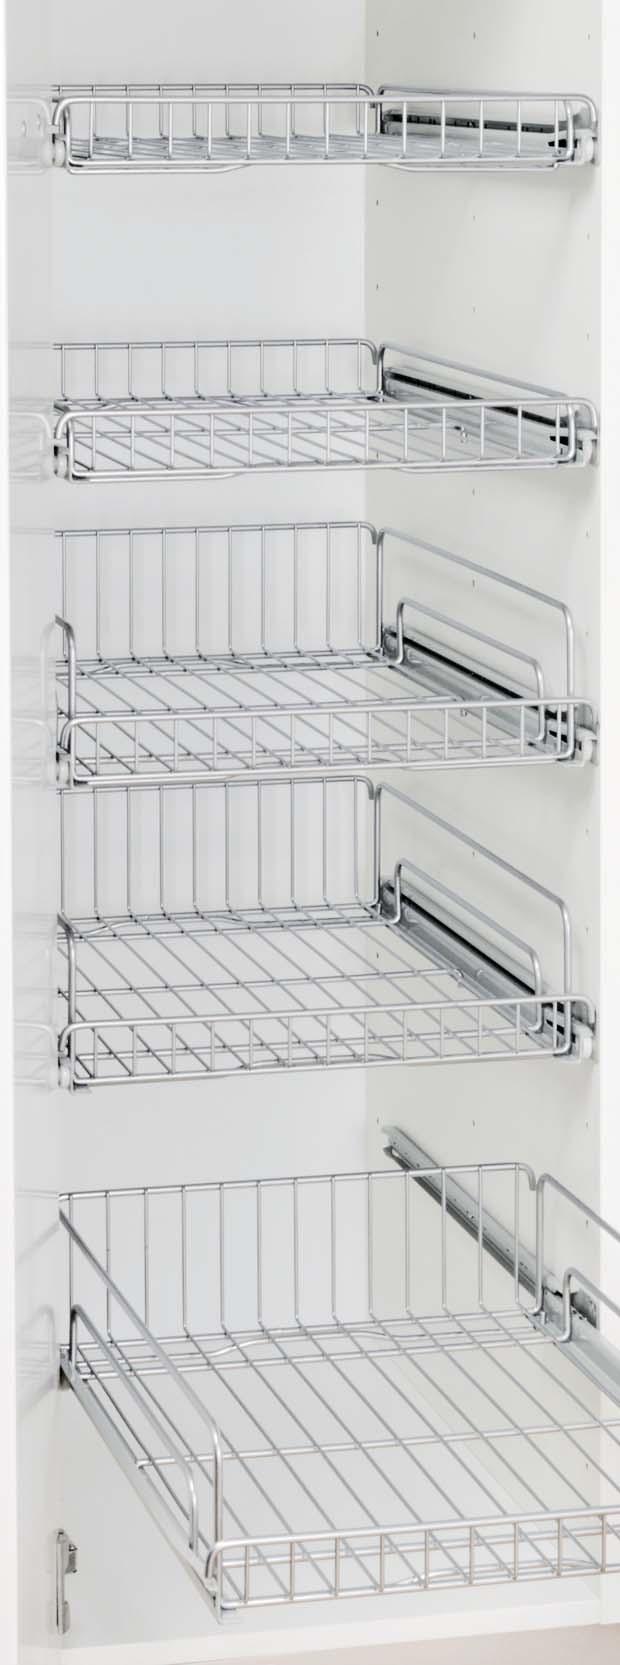 WARDROBE BASKETS 500 330/430/530-50 WARDROBE BASKET A stabile and practical solution that help you organize your wardrobe and gives a good accessibility to your clothes.